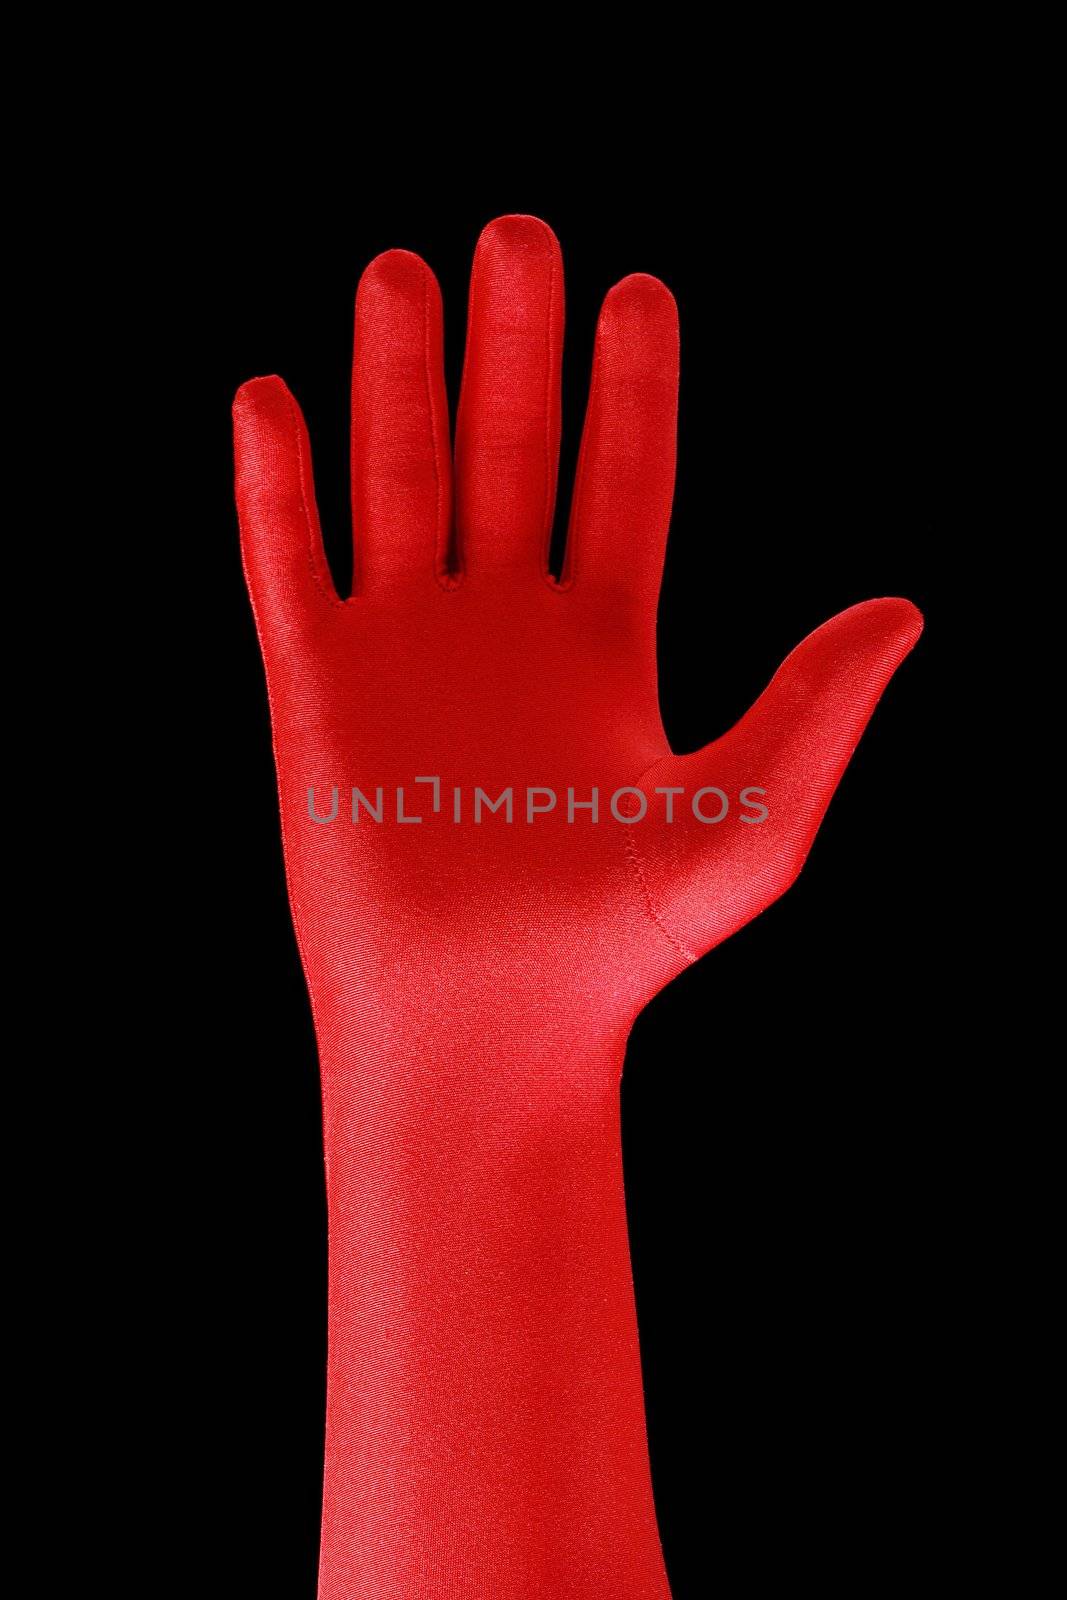 Strange hand with a red glove